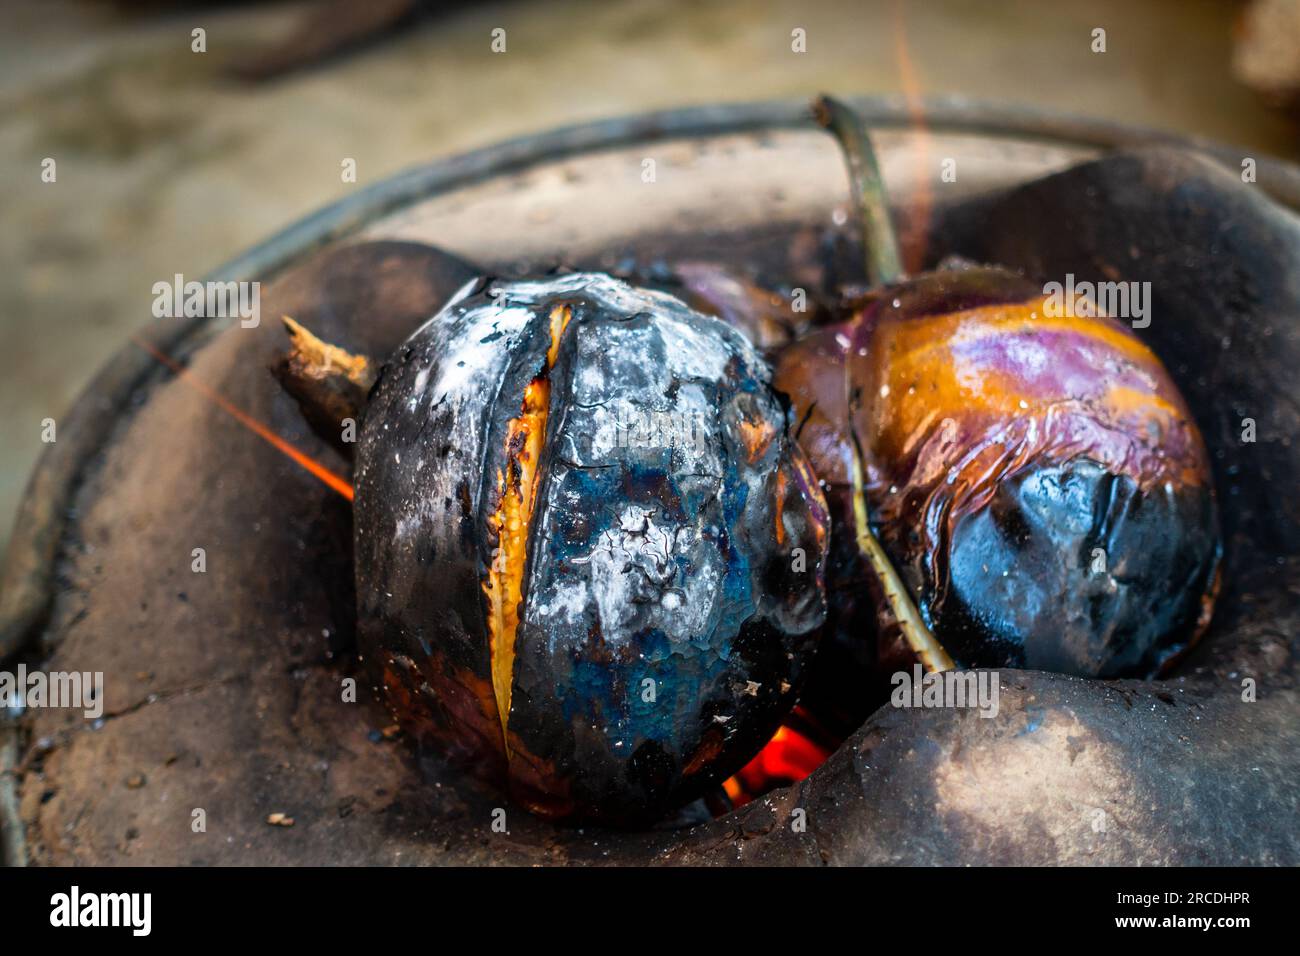 Whole roasted eggplant or brinjal in a traditional clay stove, Angeethi in Northern India. Preparation of a North Indian cuisine, Baigan ka Bharta. In Stock Photo